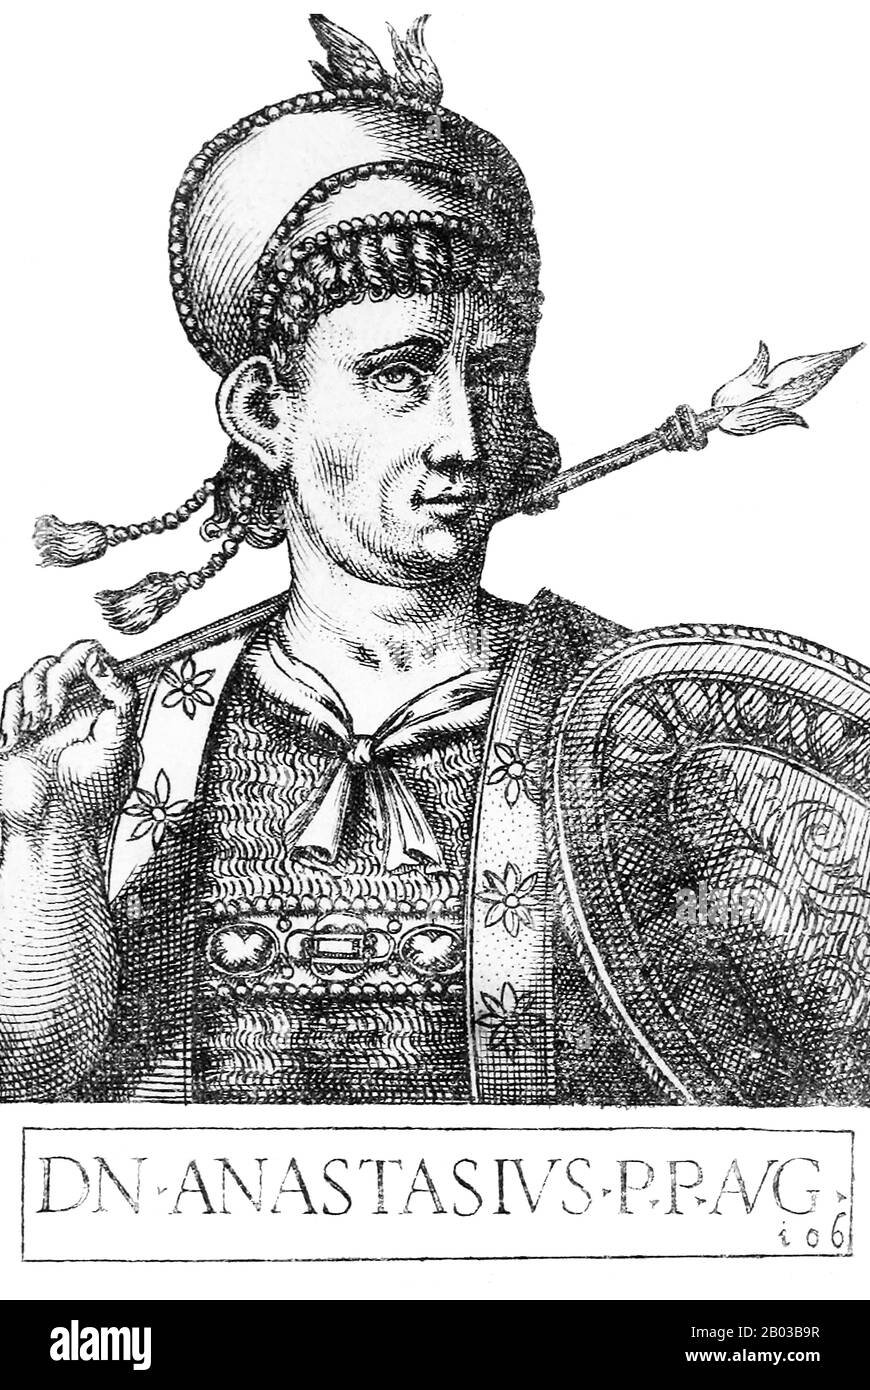 Anastasius II (-719), also known as Anastasios II and originally named Artemius, was a bureaucrat and imperial secretary in the Byzantine court. He was proclaimed emperor in 713 by the Opsician army after they had overthrown Emperor Philippicus. Changing his name to Anastasius, he took the throne and turned on those who had aided his rise by executing those directly involved in the conspiracy against Philippicus. Stock Photo